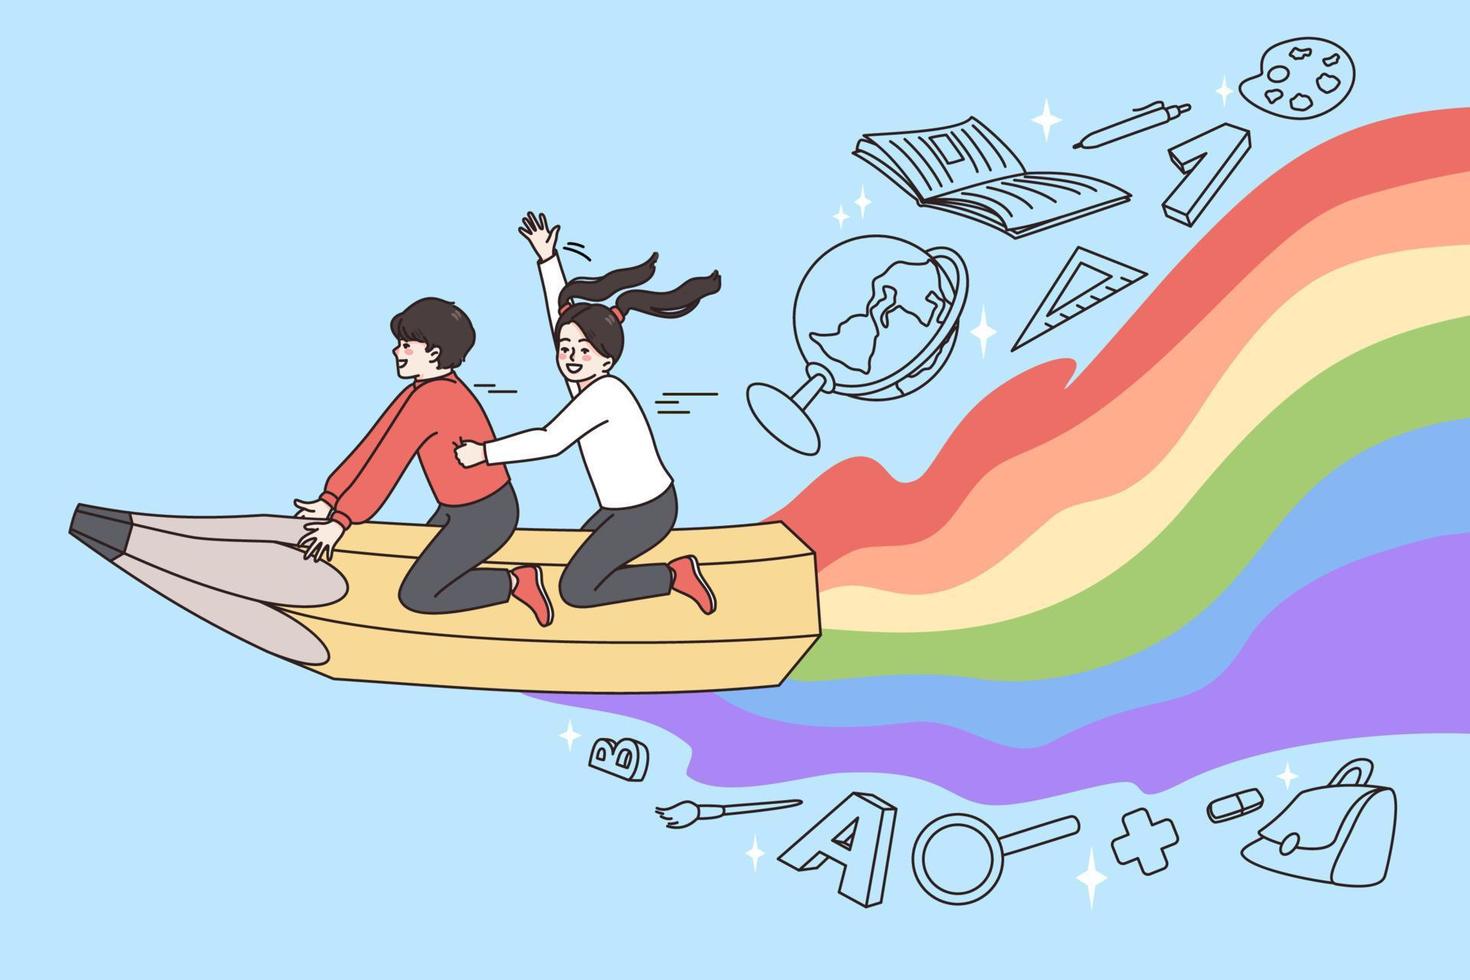 Children enjoying drawing and painting concept. Two friends kids boy and girl sitting on pencil with rainbow shadow flying over sky vector illustration